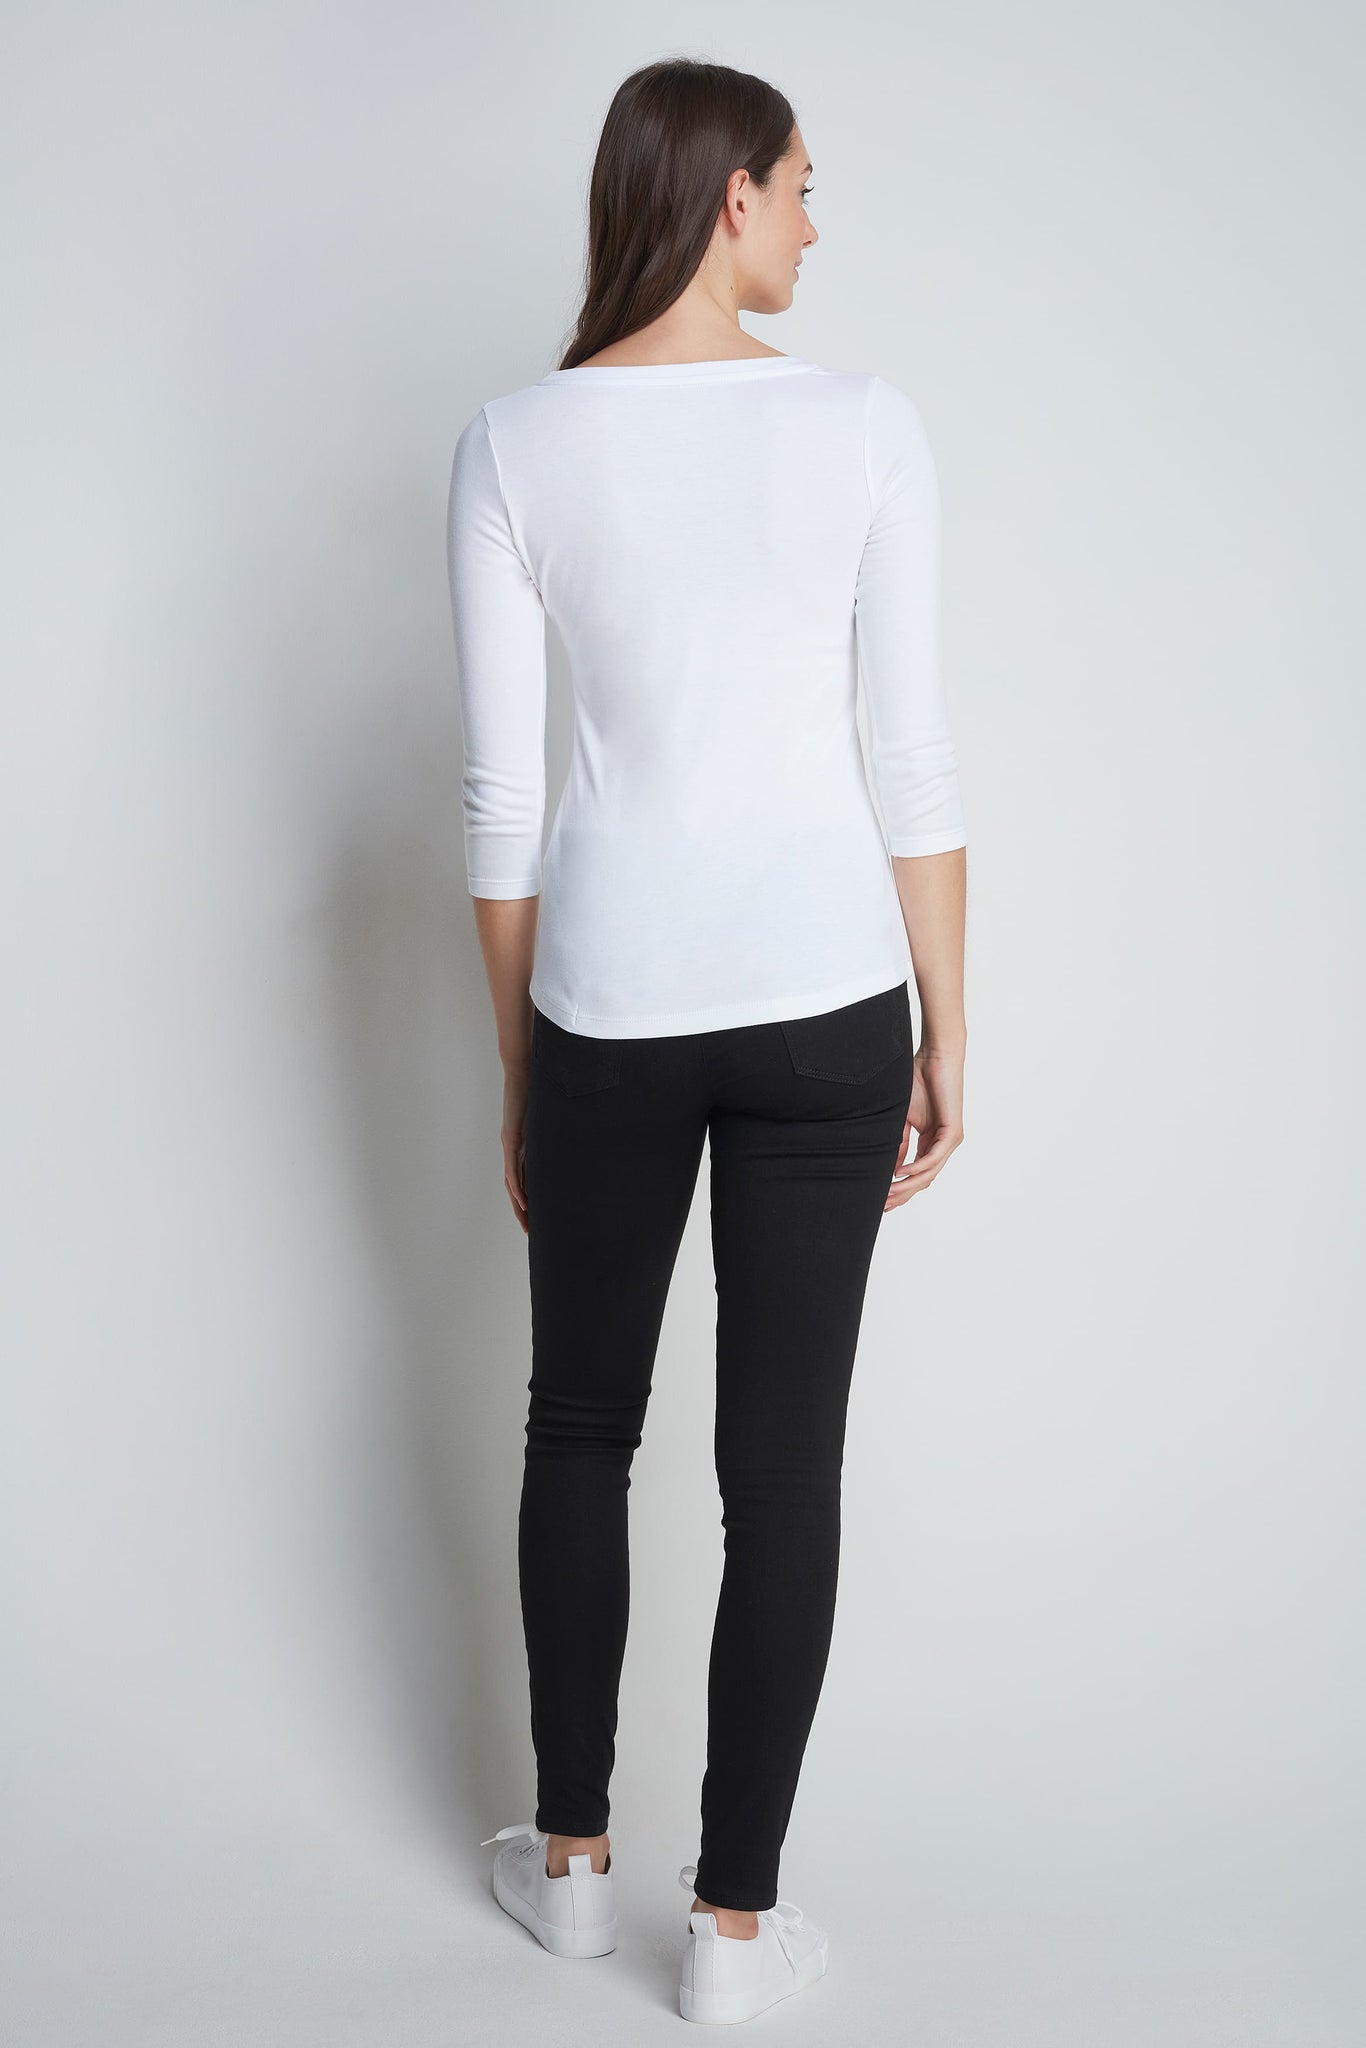 Women's White Quality Cotton Jersey 3/4 Sleeve Scoop Neck T-Shirt by Lavender Hill Clothing